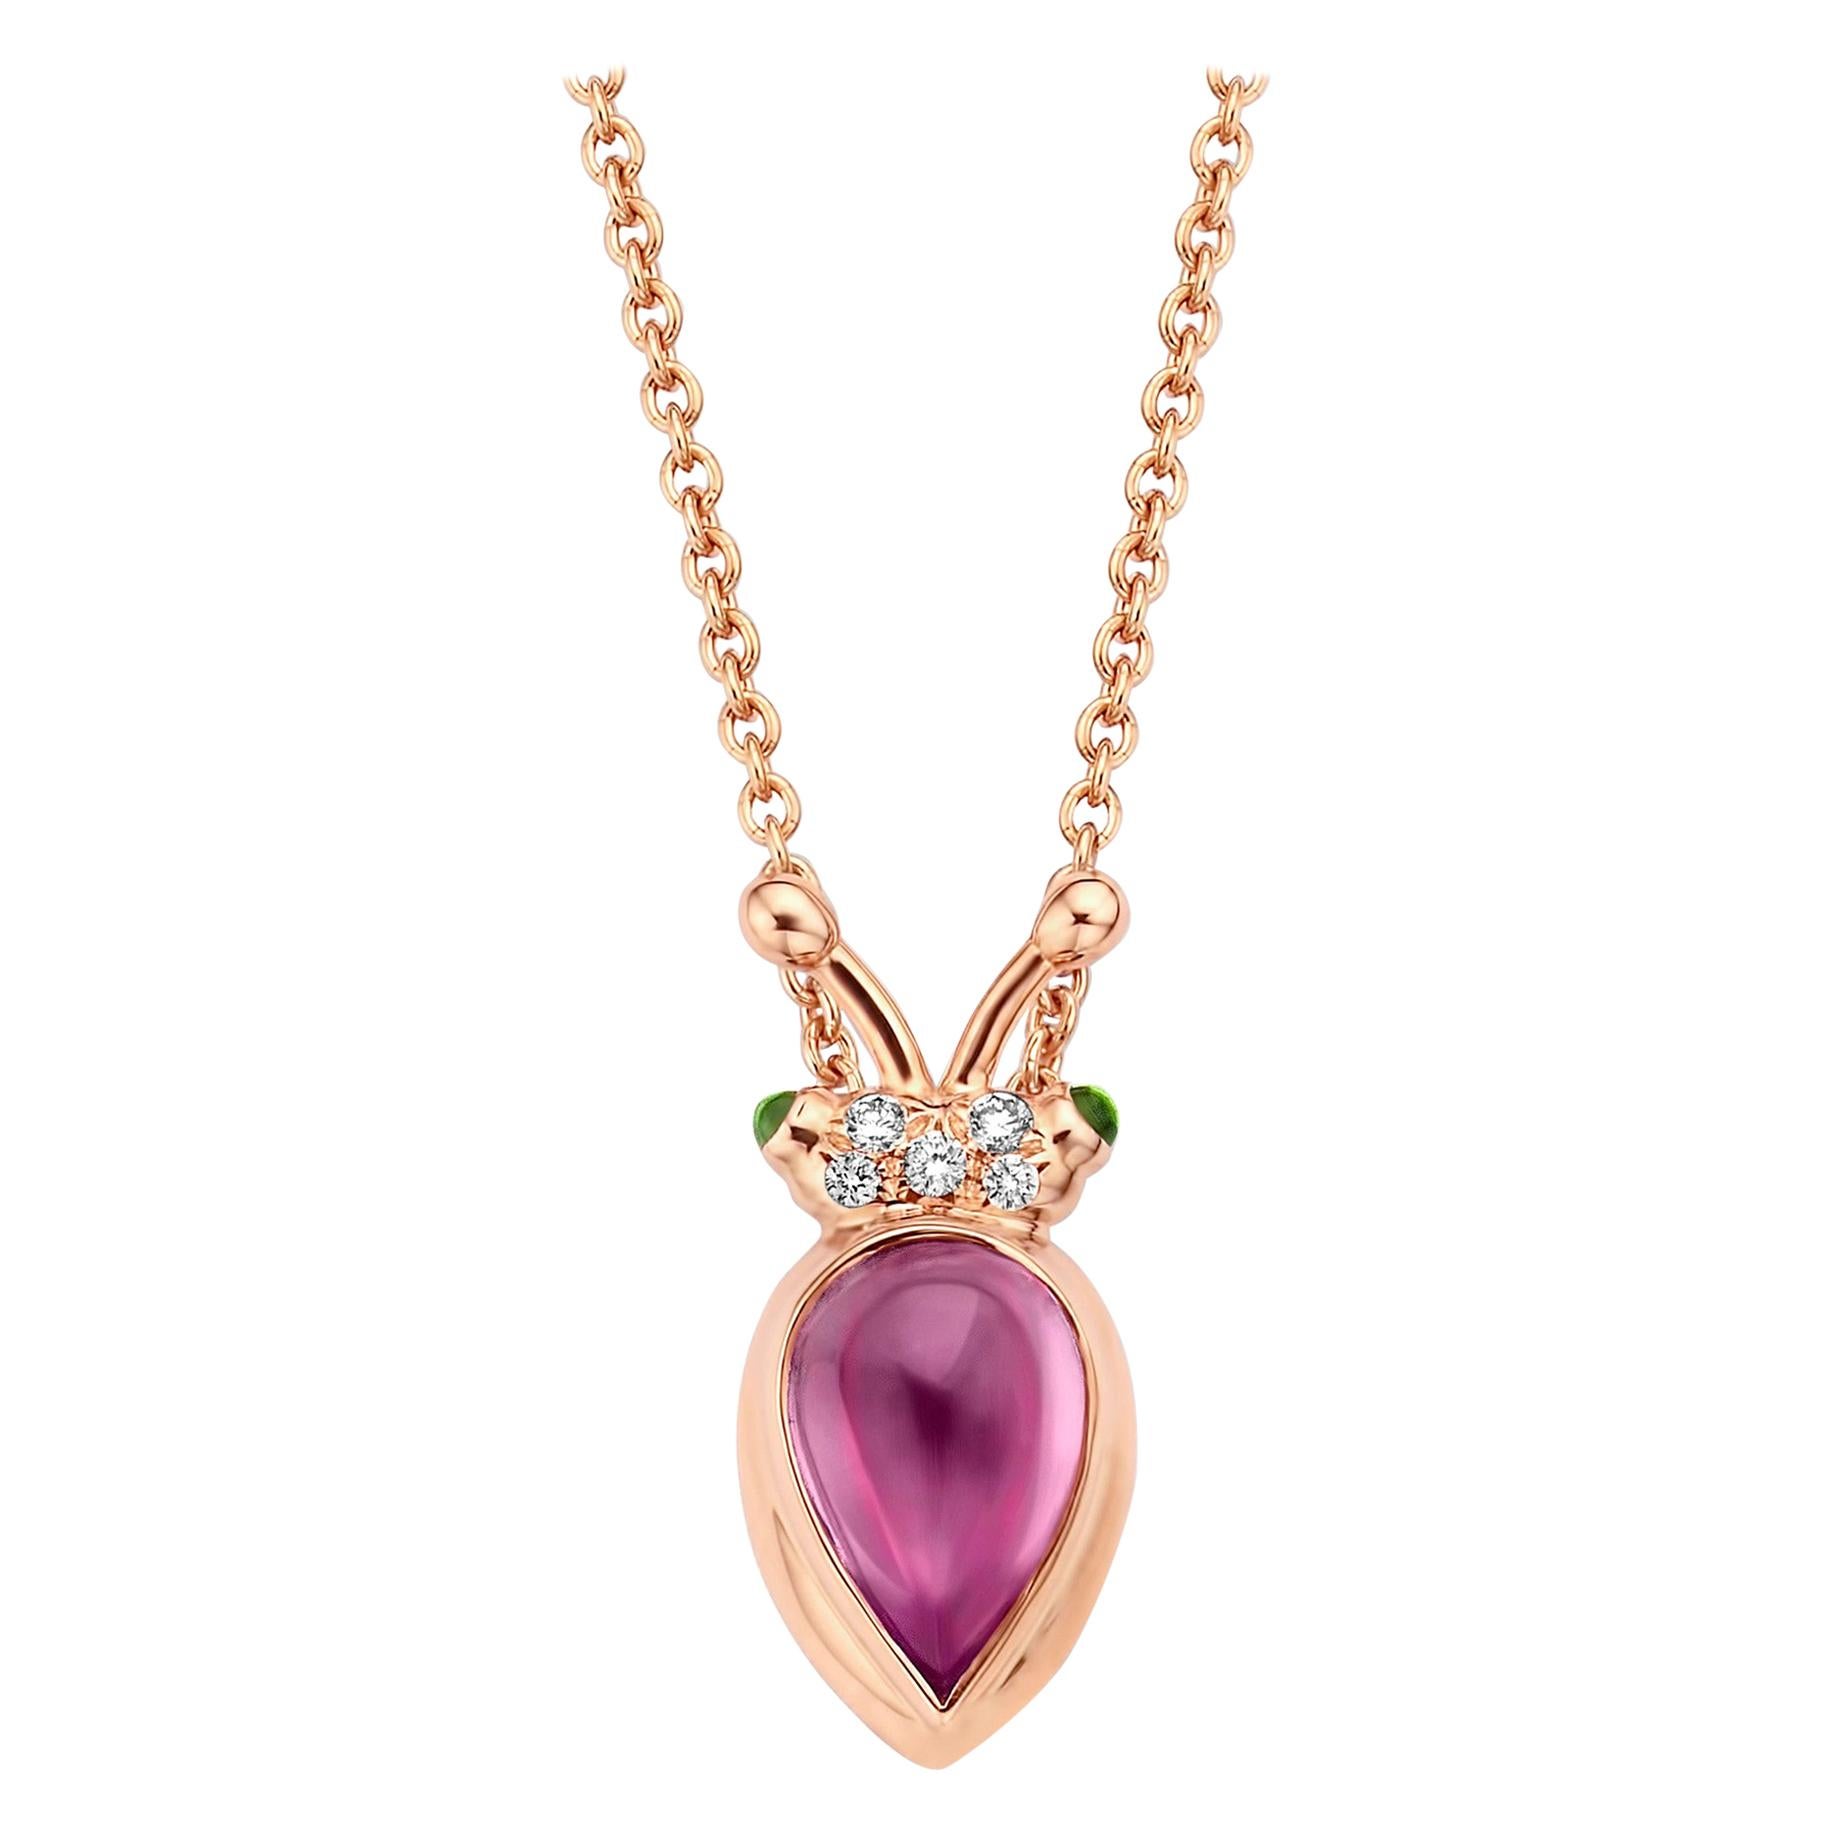 One of a kind lucky beetle necklace in 18K rose gold 6g created by jewelry designer Celine Roelens. 
This necklace is set with 0,04Ct of the finest brilliant cut diamonds in VVS/DEF quality and one natural, royal purple garnet in pear cabochon cut